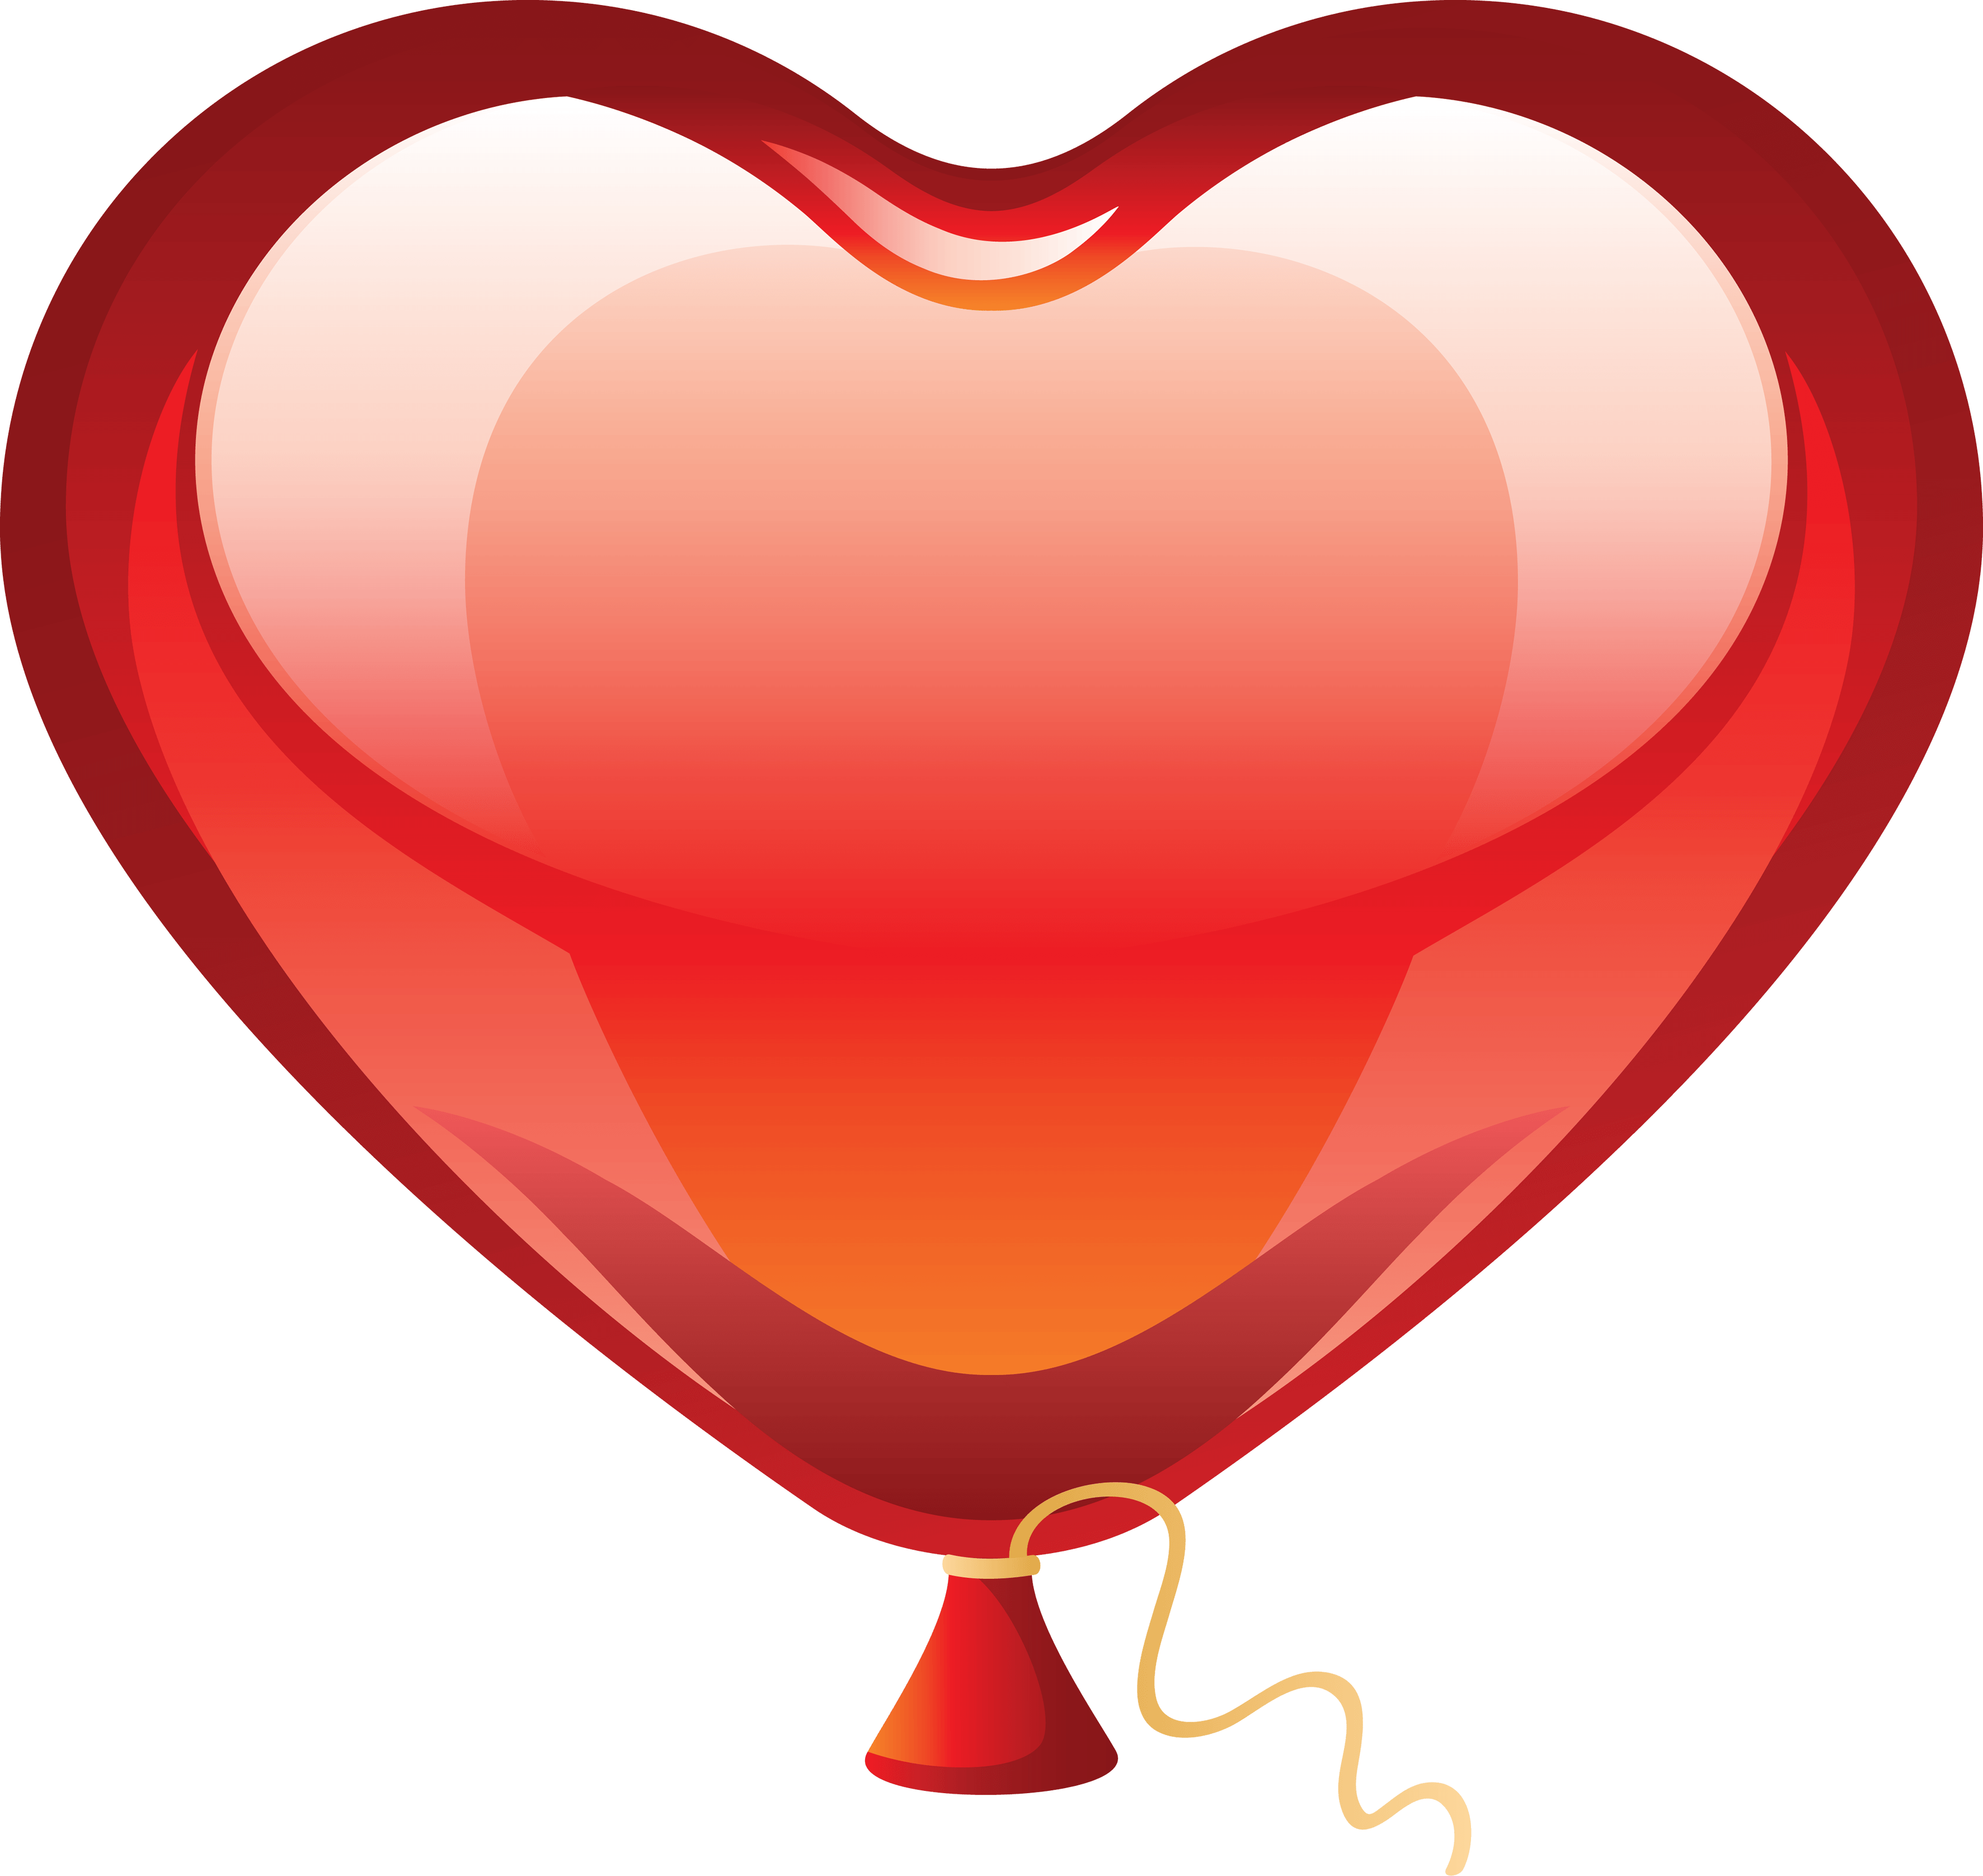 Heart Balloon Background PNG Image